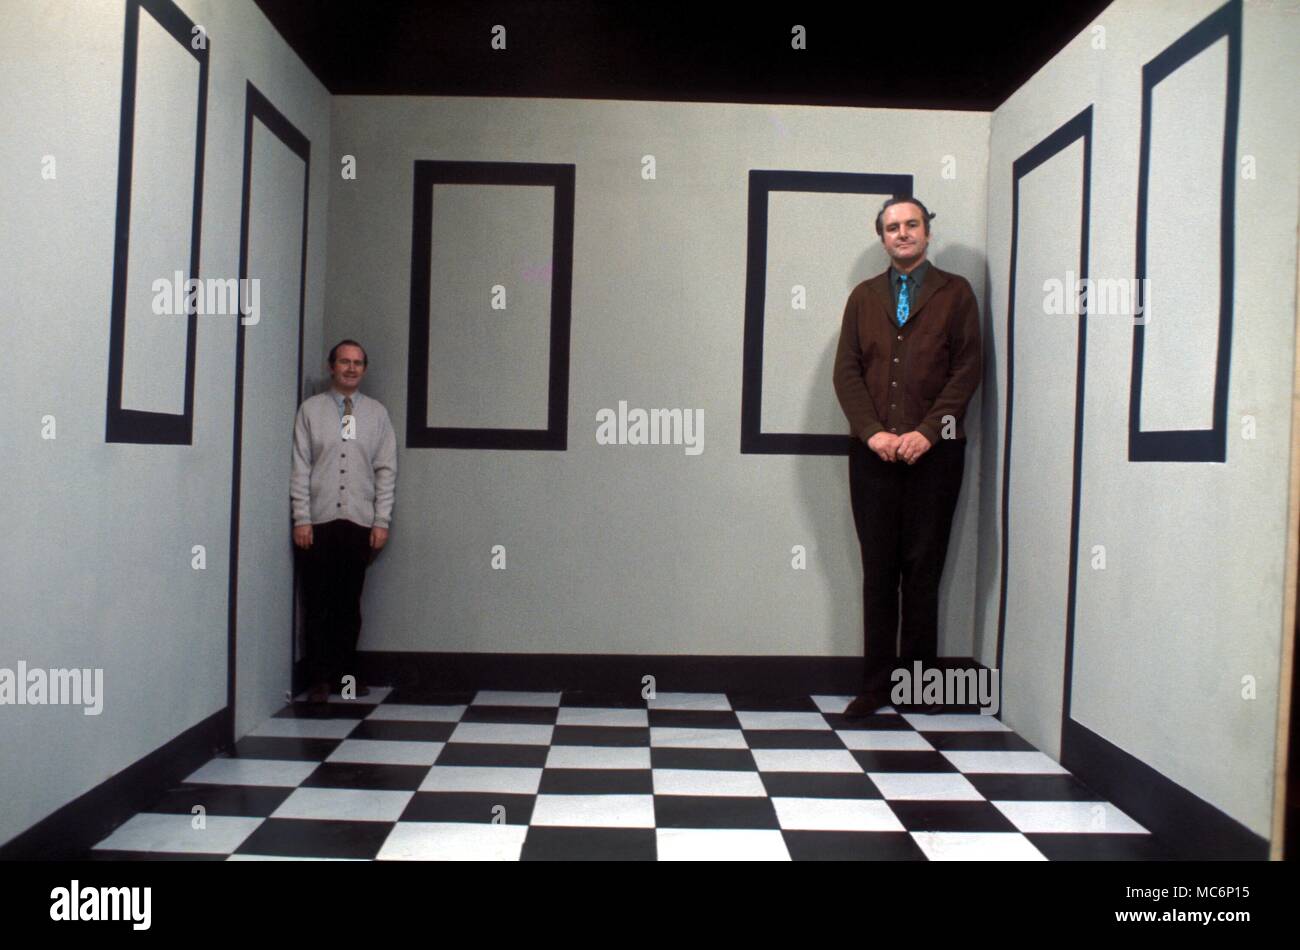 Illusions. Two men of similar height standing in an Ames Room designed to create the optical illusion which changes the relative heights of the men. Stock Photo